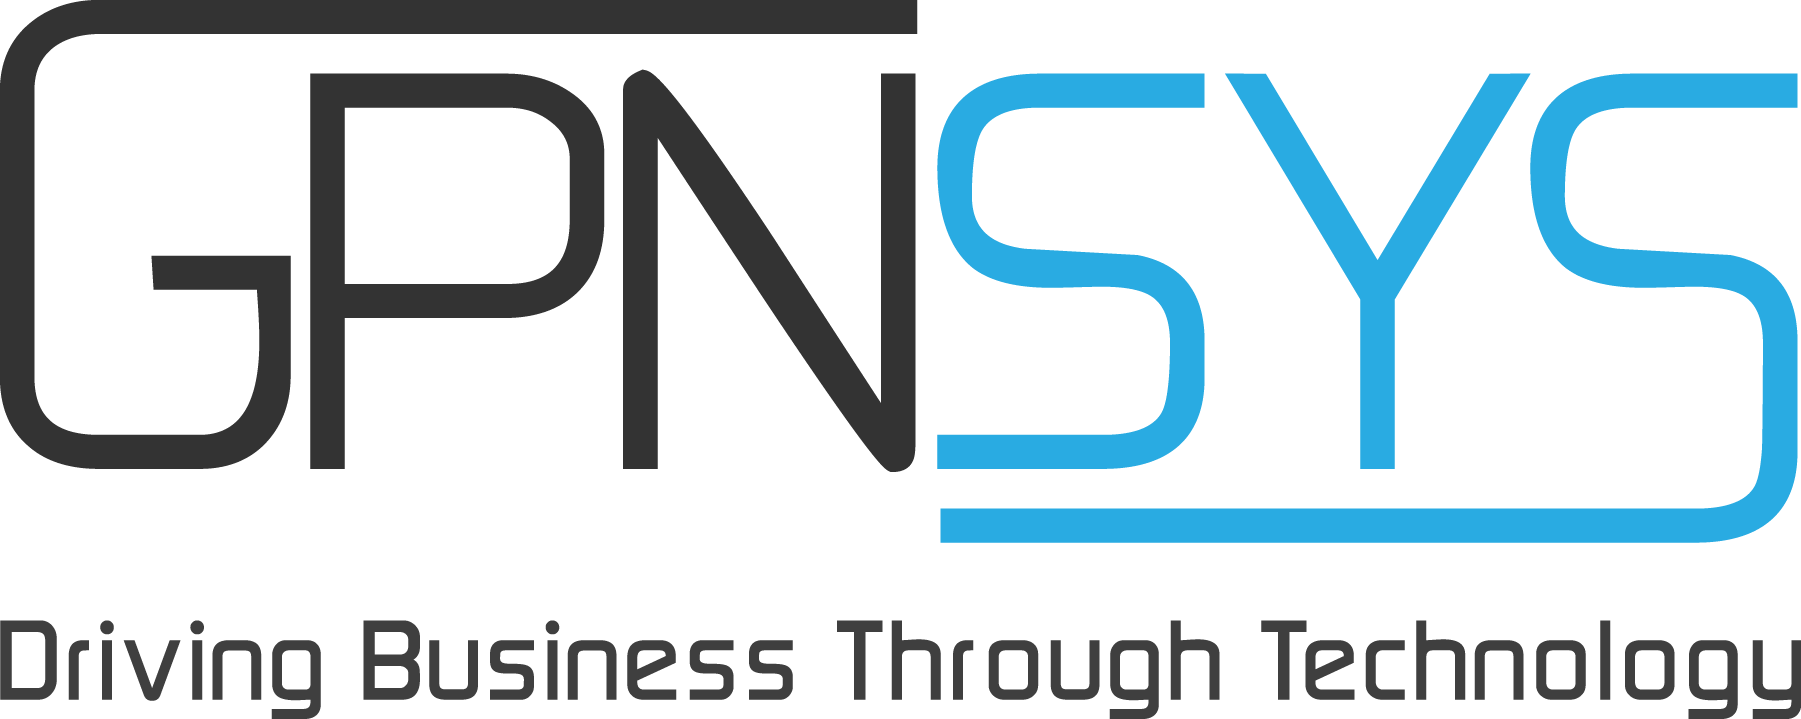 GPNSYS INC